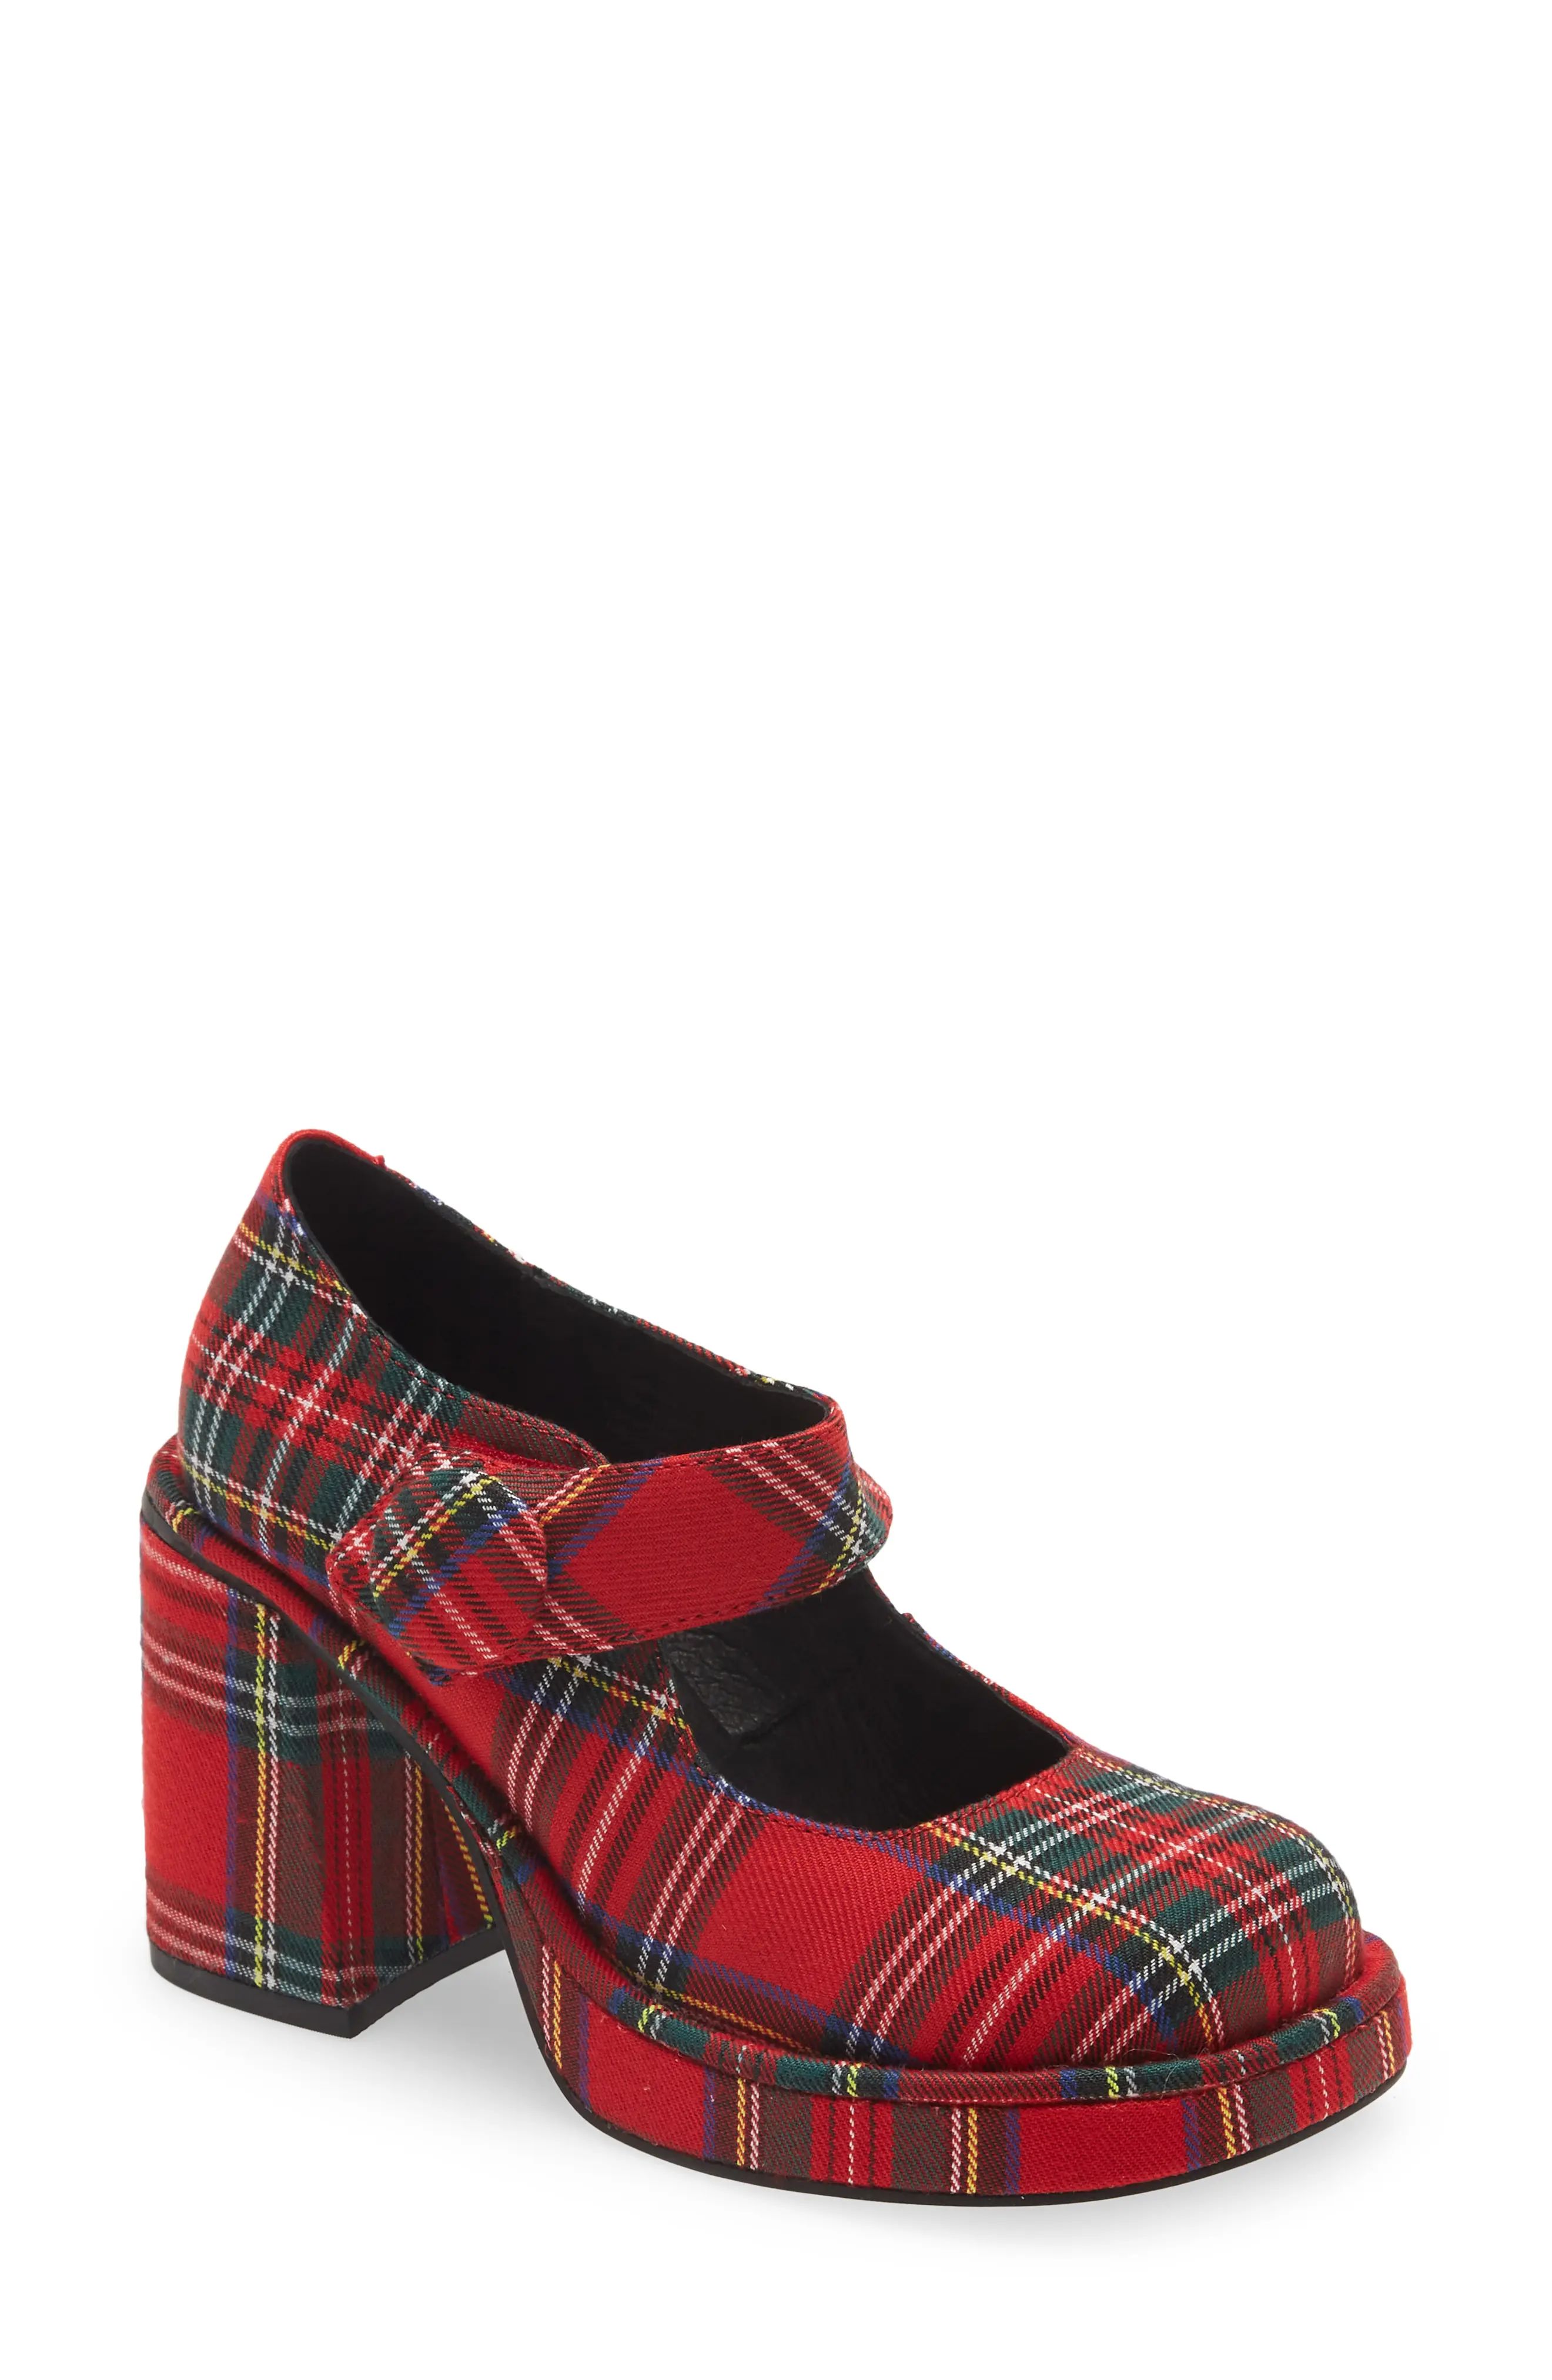 Jeffrey Campbell Umino Plaid Platform Mary Jane Pump, Size 11 in Red Tartan at Nordstrom | Nordstrom